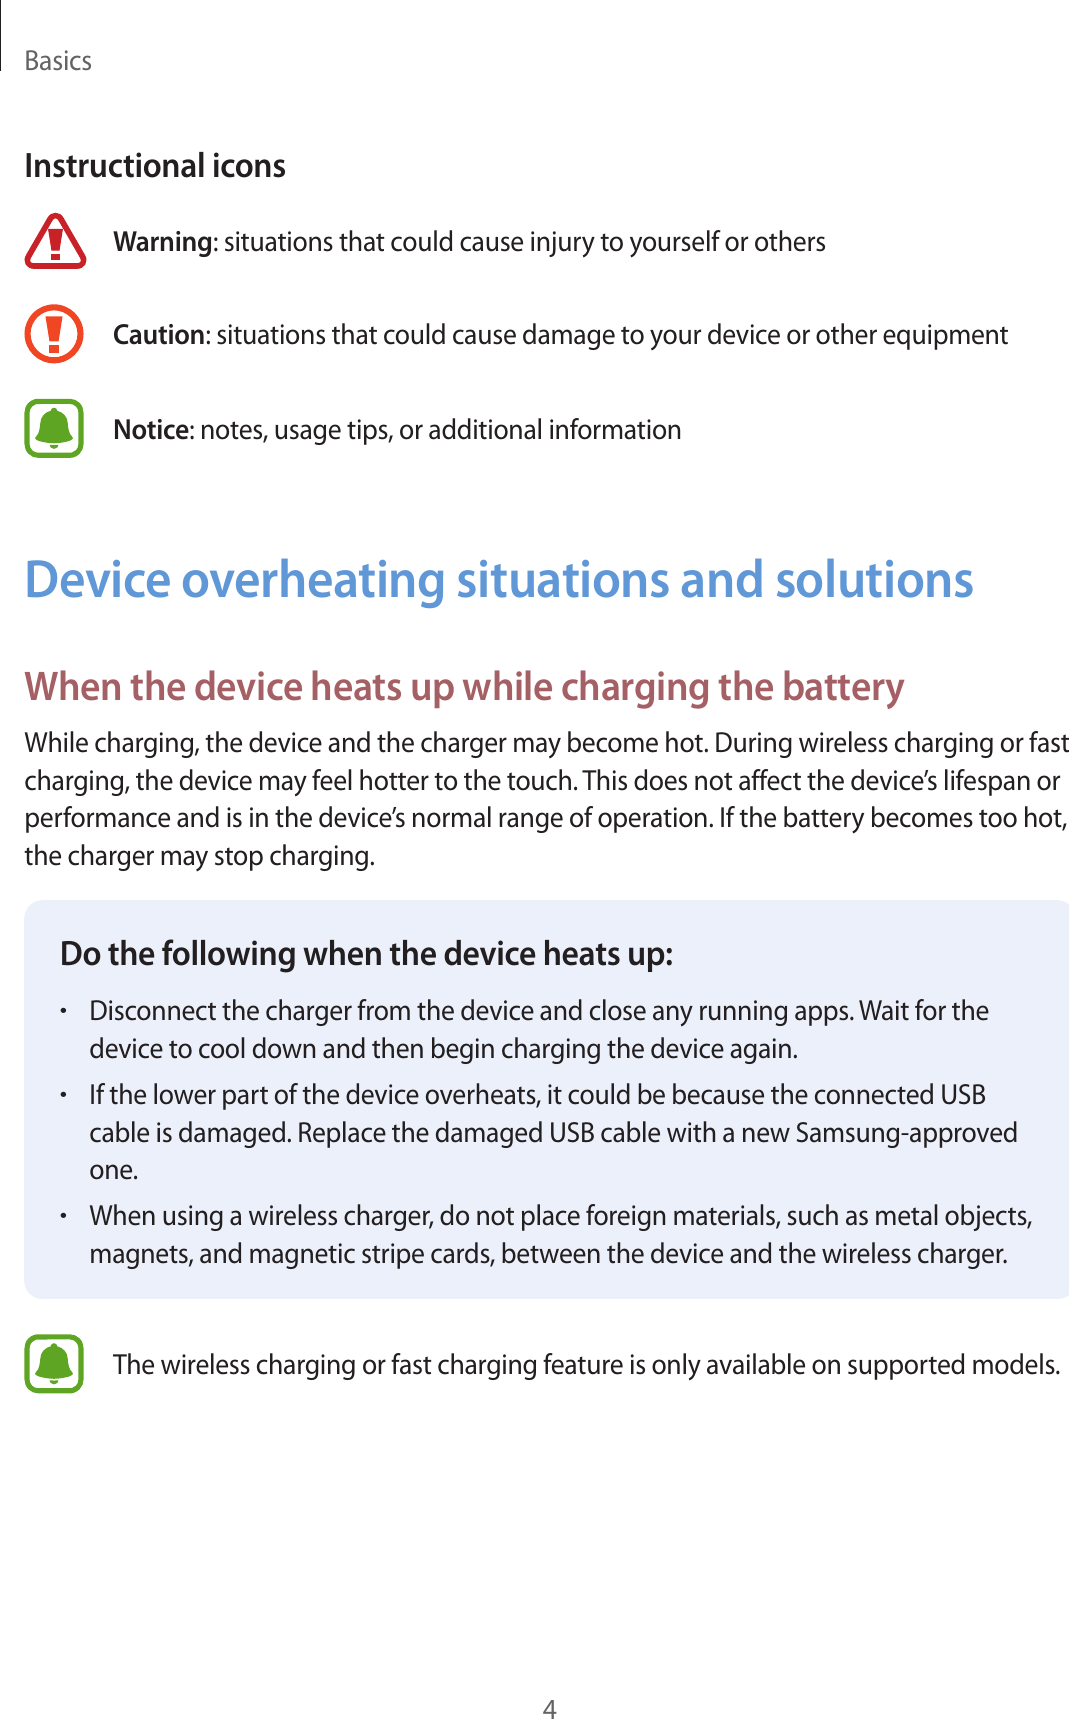 Basics4Instructional iconsWarning: situations that could cause injury to yourself or othersCaution: situations that could cause damage to your device or other equipmentNotice: notes, usage tips, or additional informationDevice overheating situations and solutionsWhen the device heats up while charging the batteryWhile charging, the device and the charger may become hot. During wireless charging or fast charging, the device may feel hotter to the touch. This does not affect the device’s lifespan or performance and is in the device’s normal range of operation. If the battery becomes too hot, the charger may stop charging.Do the following when the device heats up:•Disconnect the charger from the device and close any running apps. Wait for the device to cool down and then begin charging the device again.•If the lower part of the device overheats, it could be because the connected USB cable is damaged. Replace the damaged USB cable with a new Samsung-approved one.•When using a wireless charger, do not place foreign materials, such as metal objects, magnets, and magnetic stripe cards, between the device and the wireless charger.The wireless charging or fast charging feature is only available on supported models.